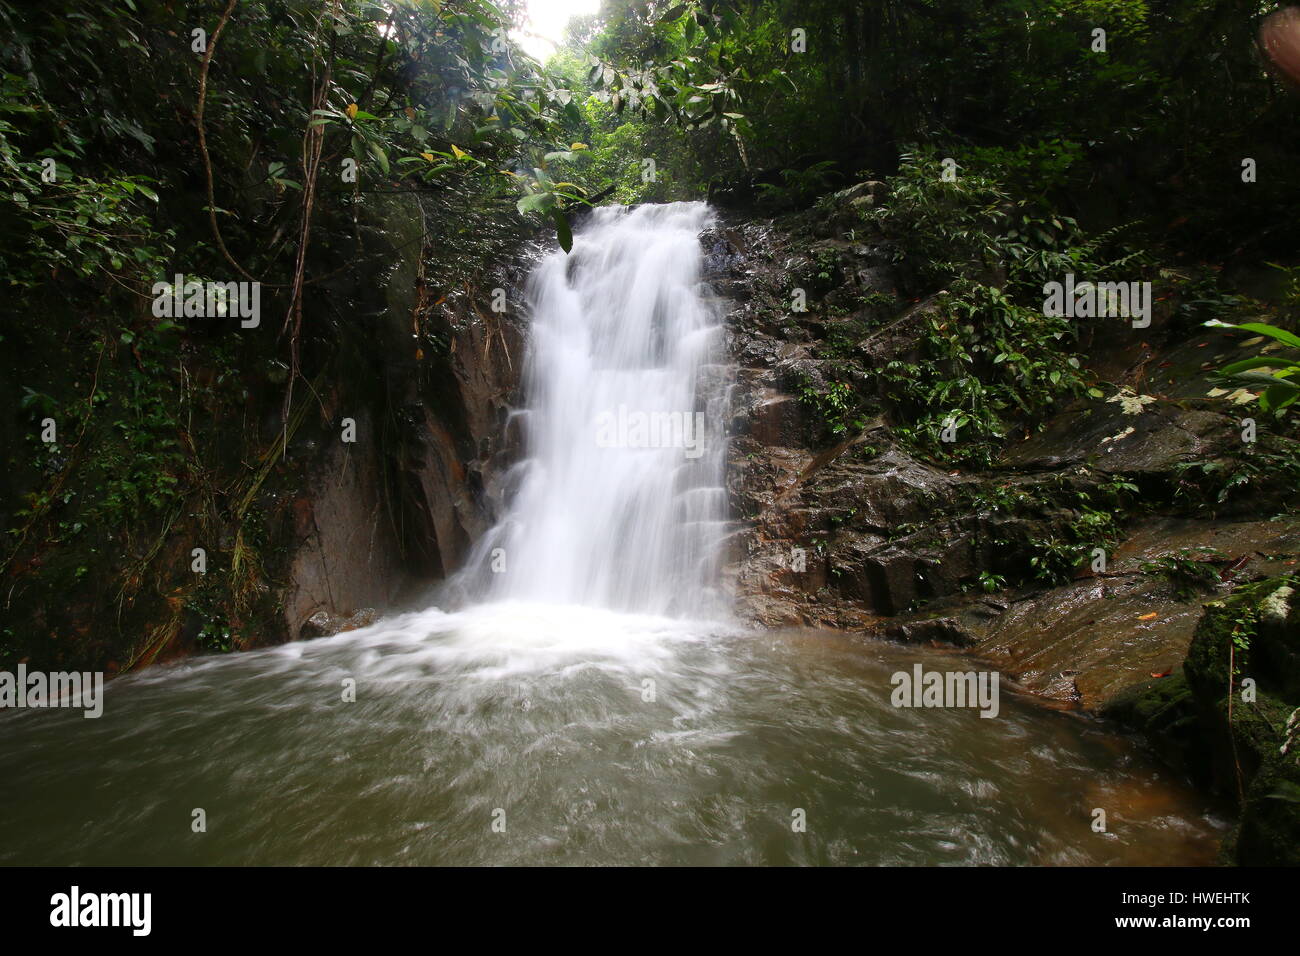 Natural waterfall inside a tropical jungle in Malaysia. Stock Photo